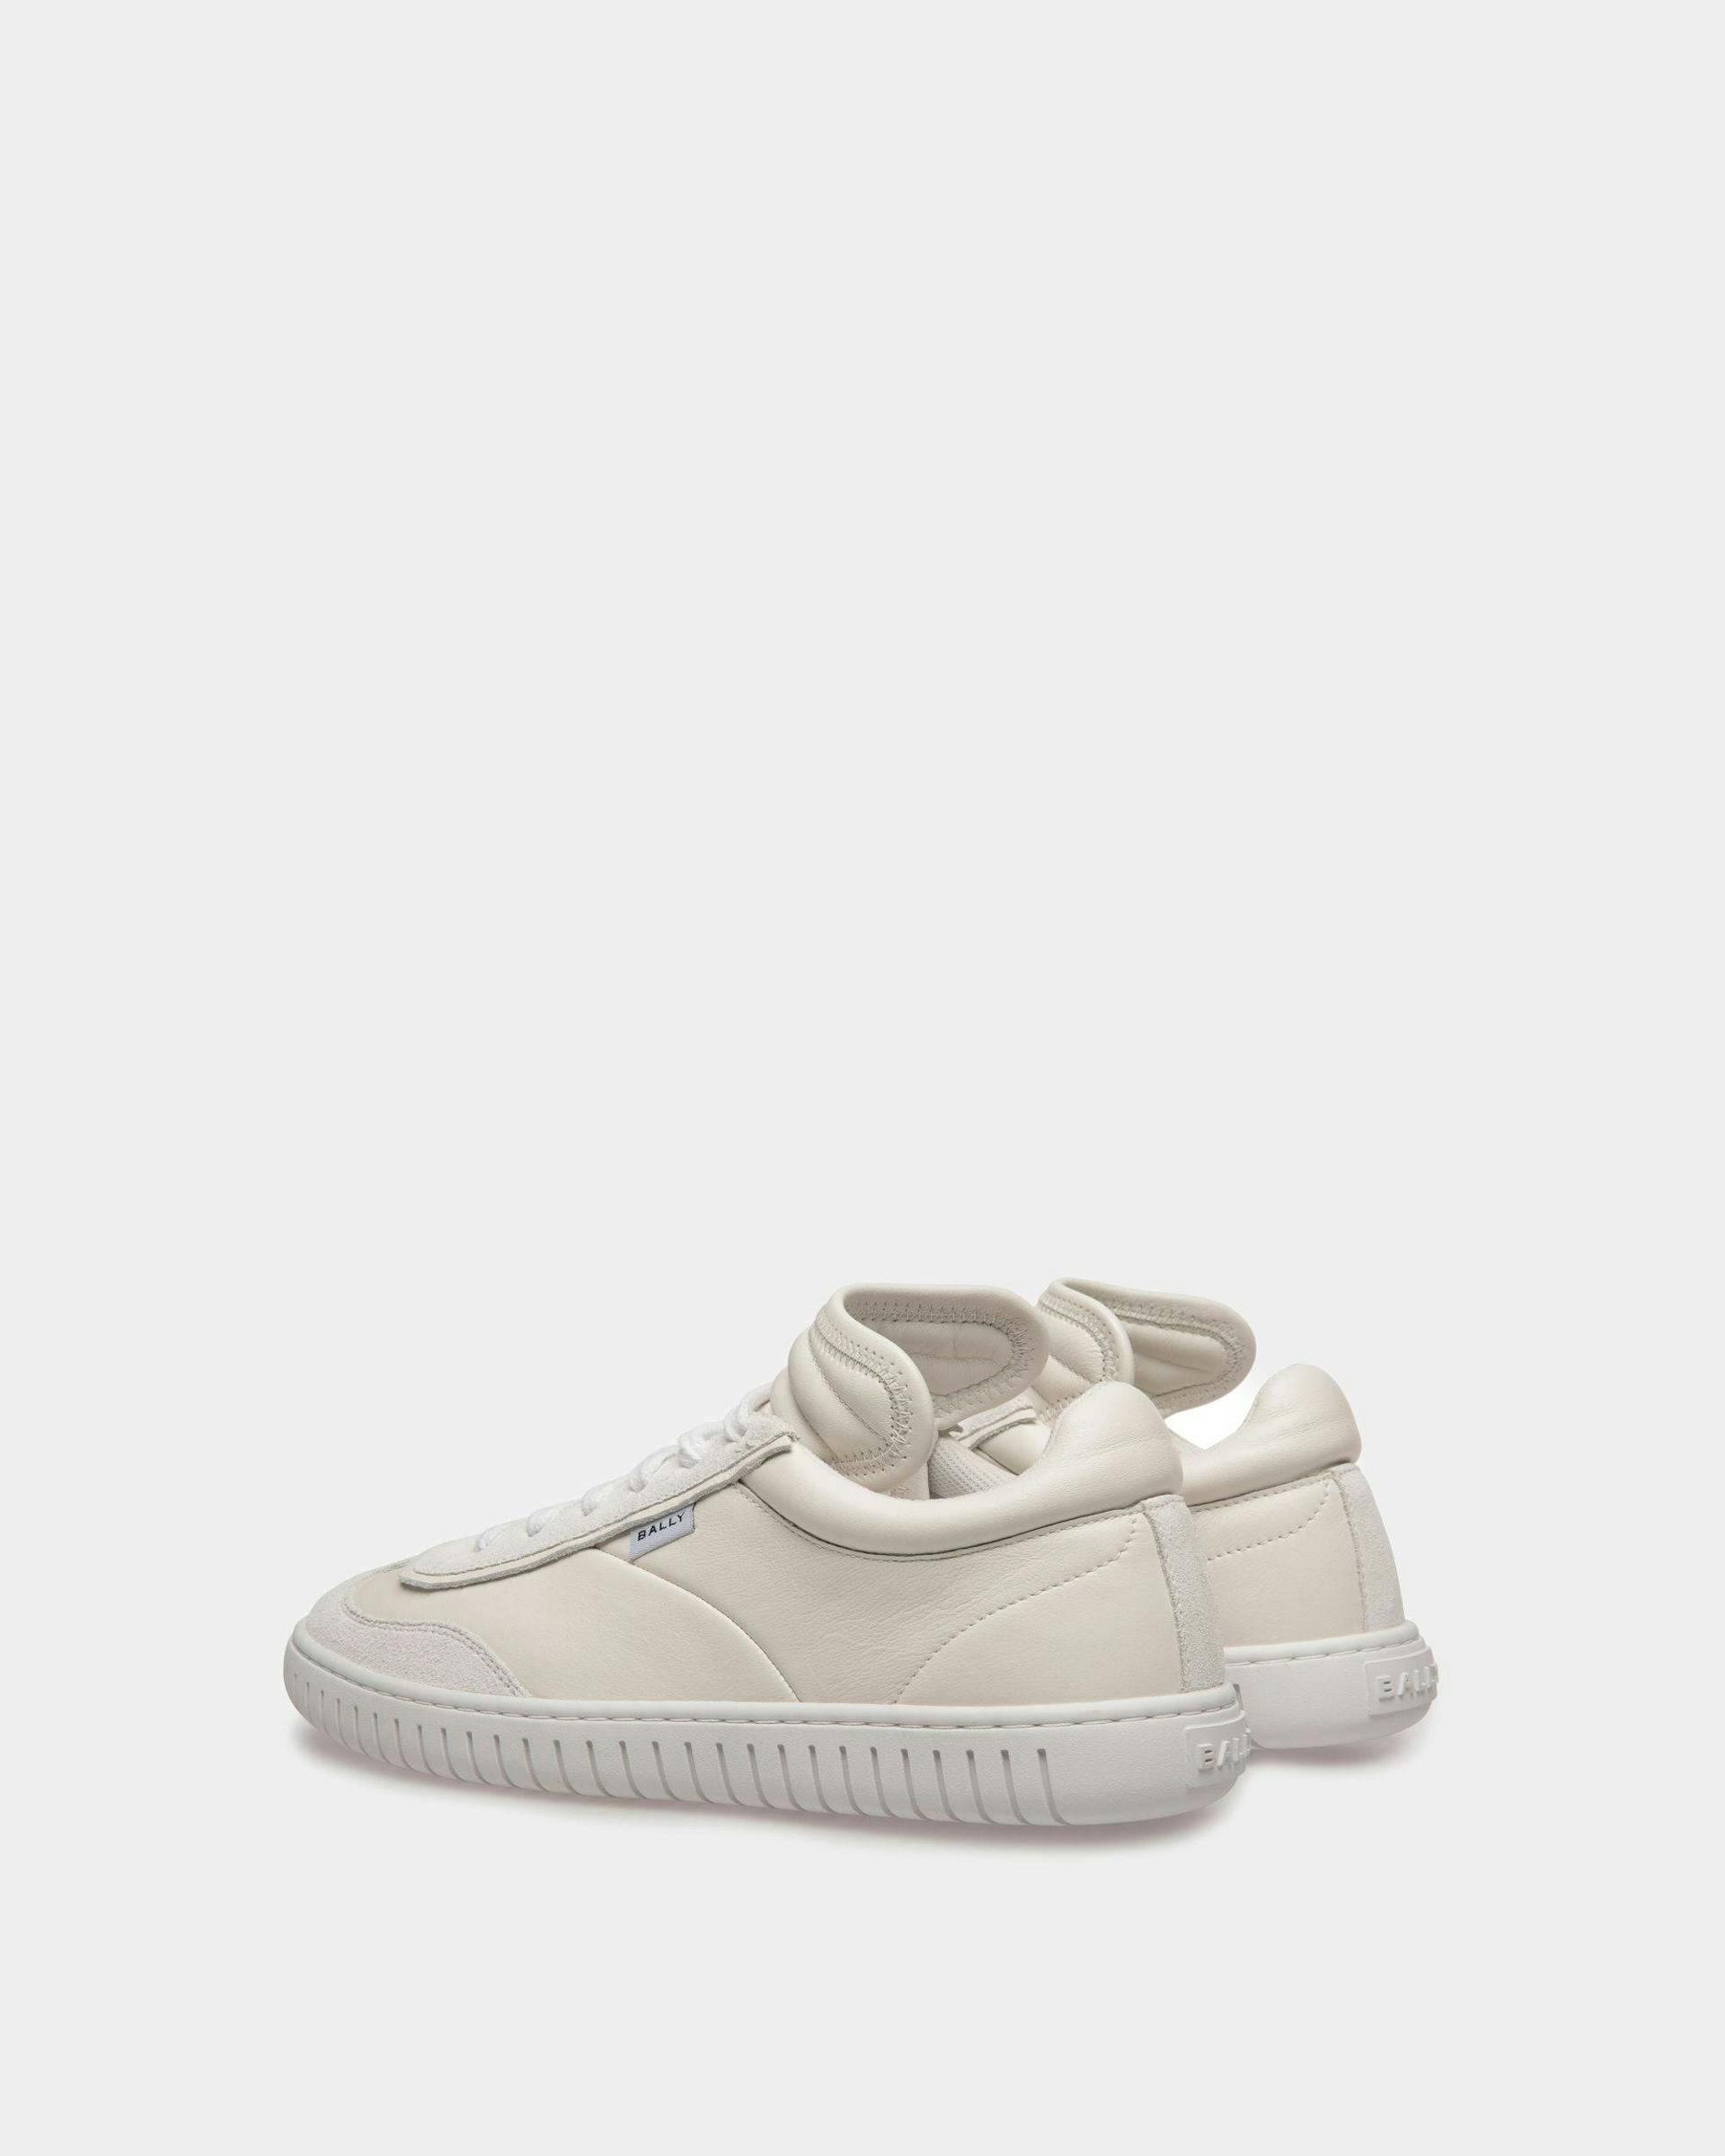 Player Sneakers In White Leather - Women's - Bally - 04